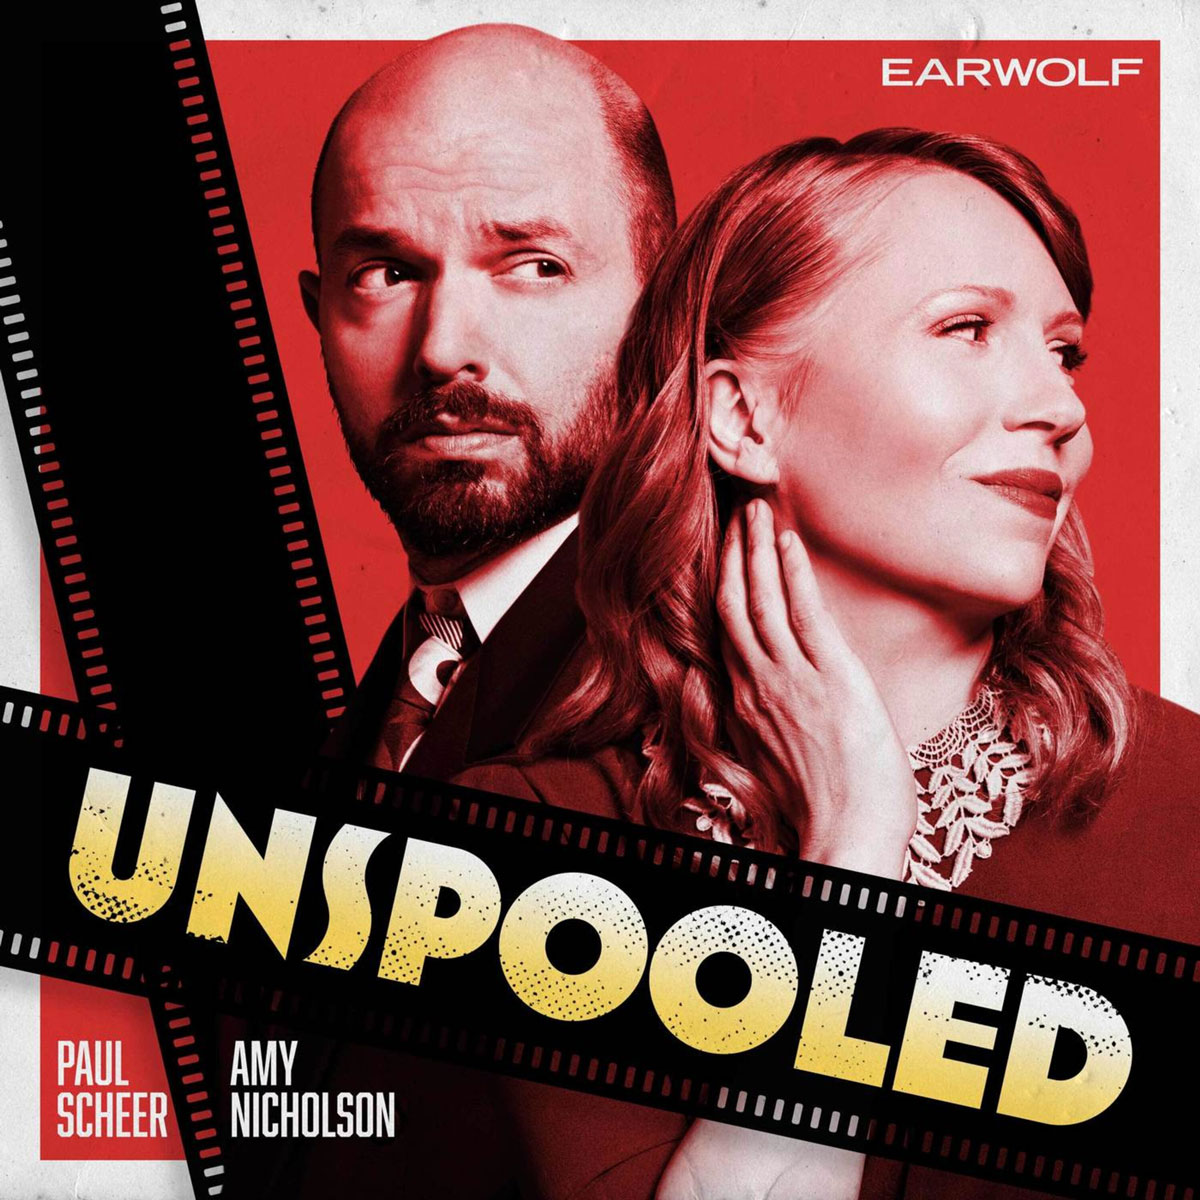 Paul Scheer and film critic Amy Nicholson take on the AFI's Top 100 list on the podcast 'Unspooled.'